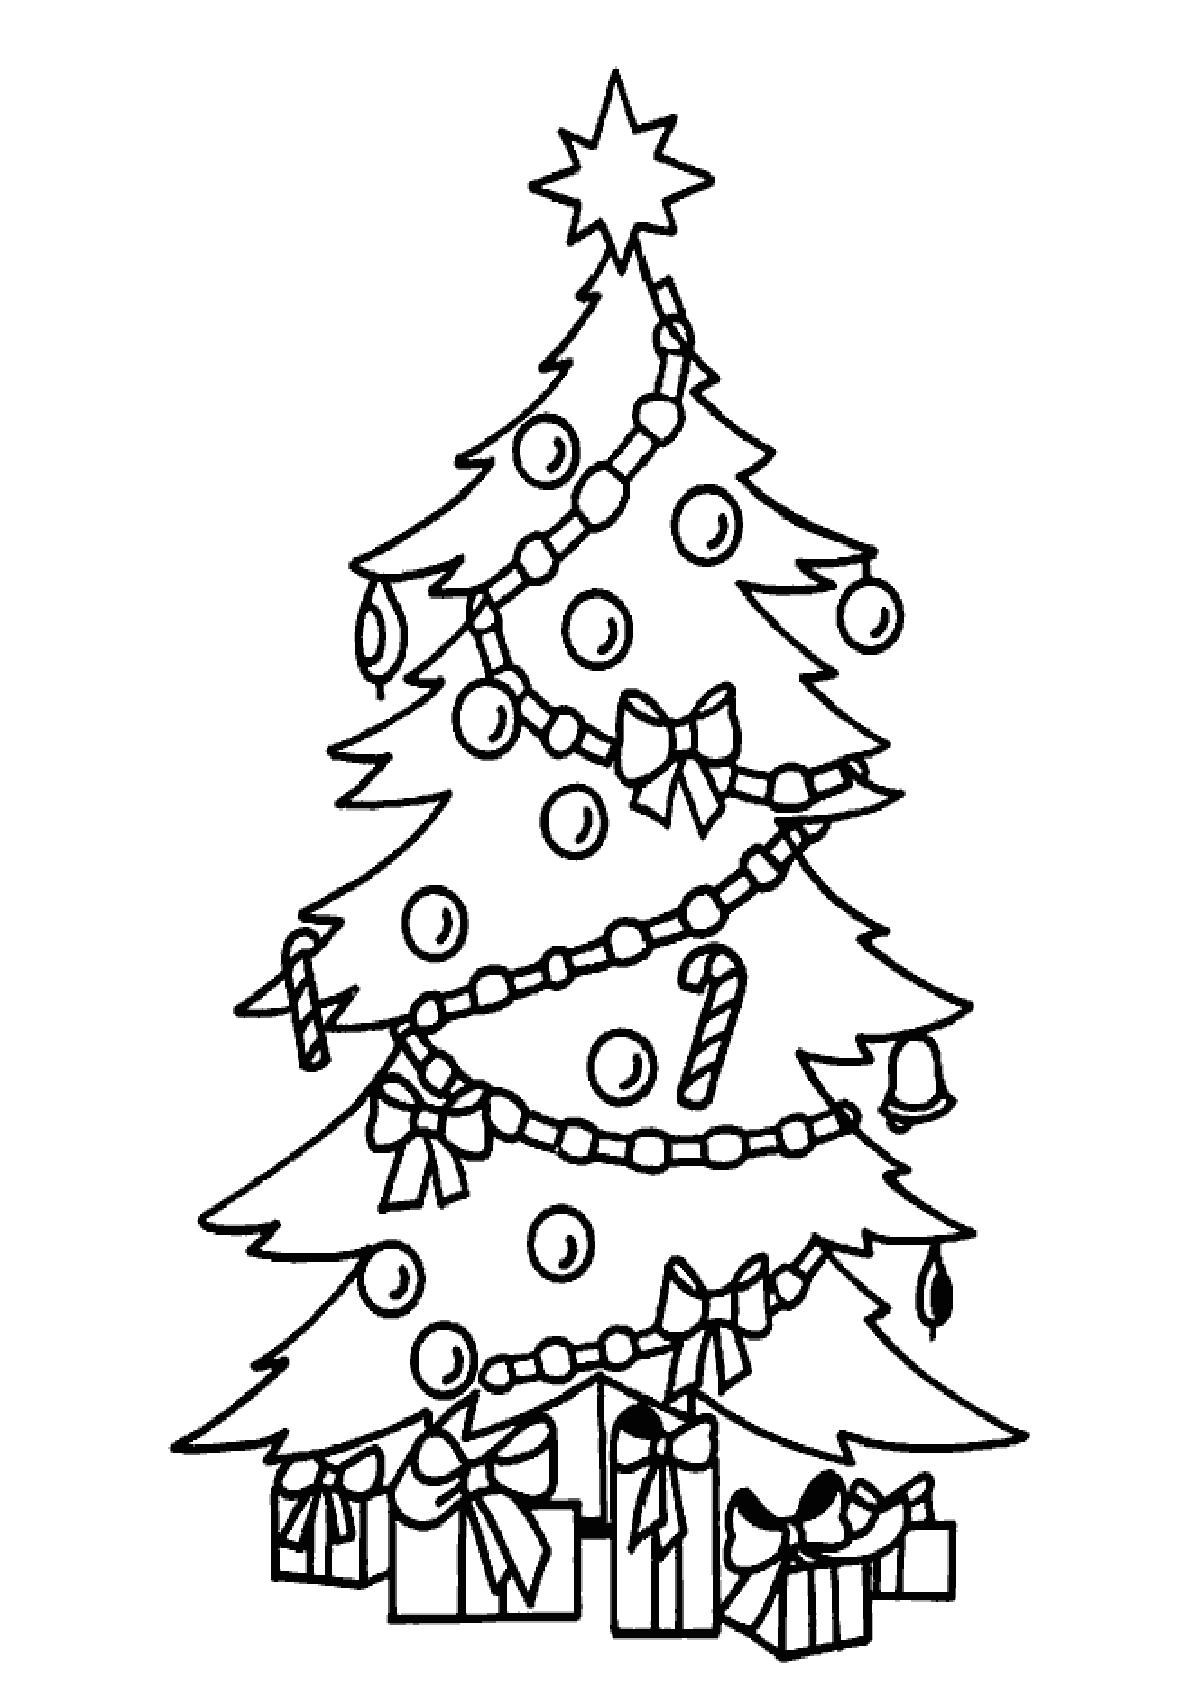 Cute Fantastic Christmas Cute Christmas Tree Coloring Pages - You can